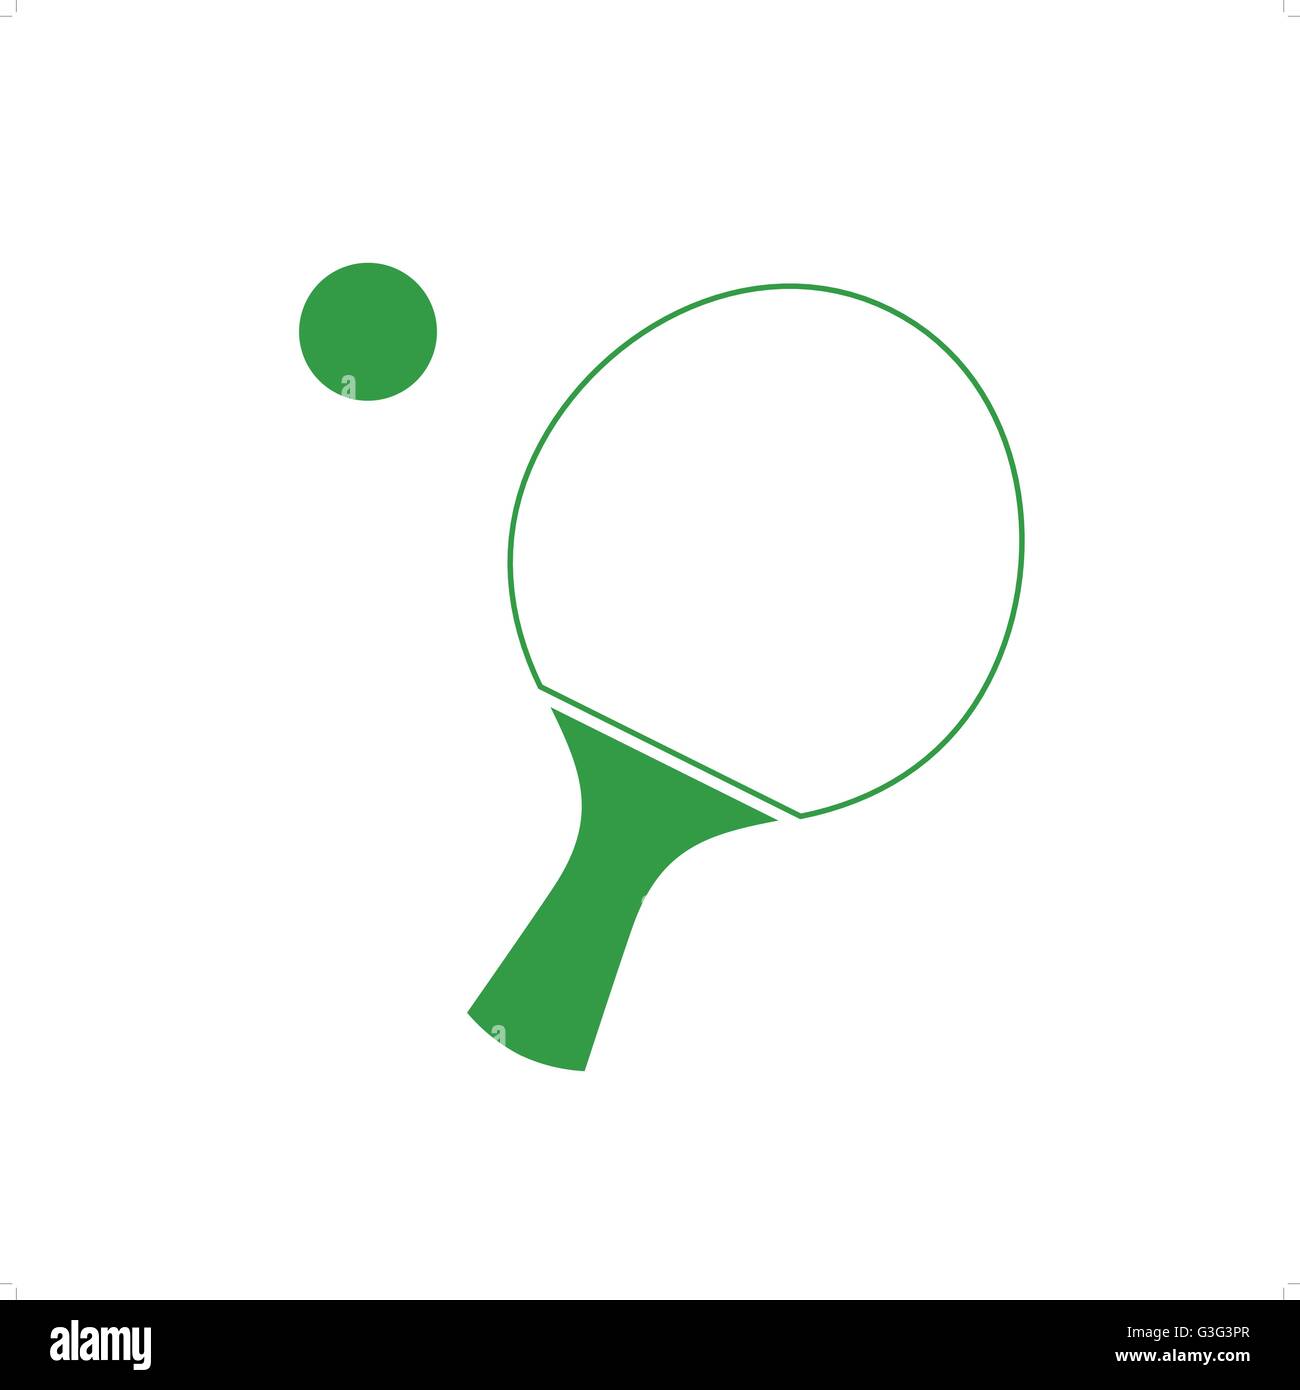 Green Line Drawing Ping Pong Racket Or Tabletennis Bat With Ball Vector Illustration Isolated On White Background Stock Vector Image Art Alamy